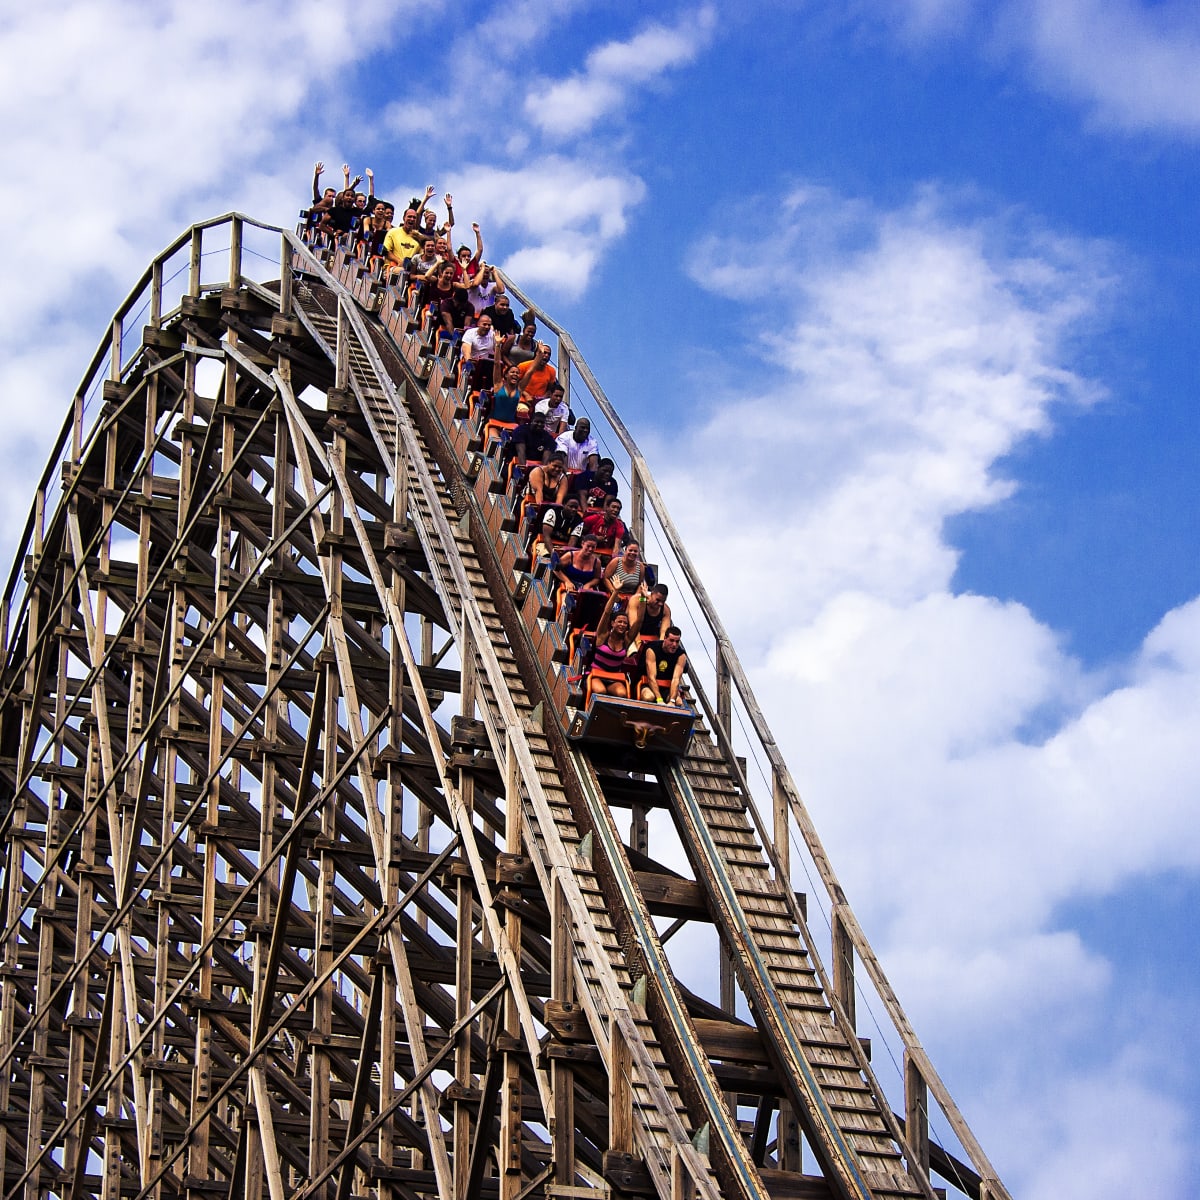 Why Wood Roller Coasters Are Better - Men's Journal